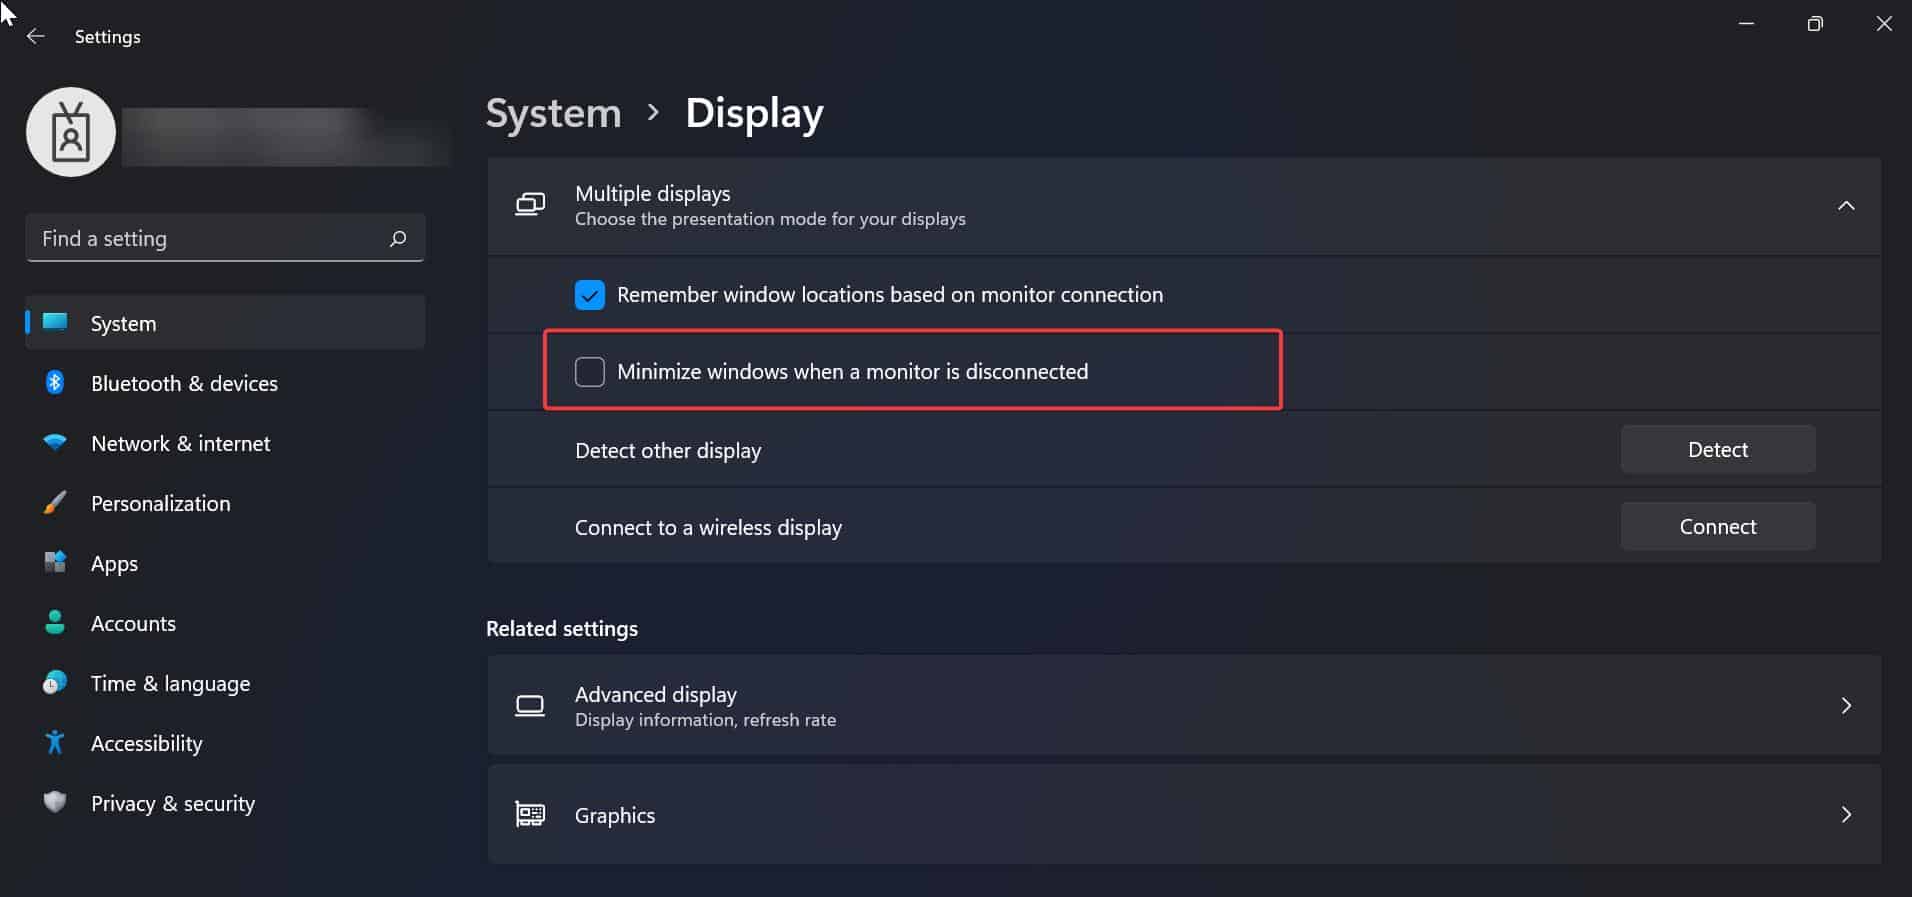 Minimize windows when a monitor is disconnected using settings